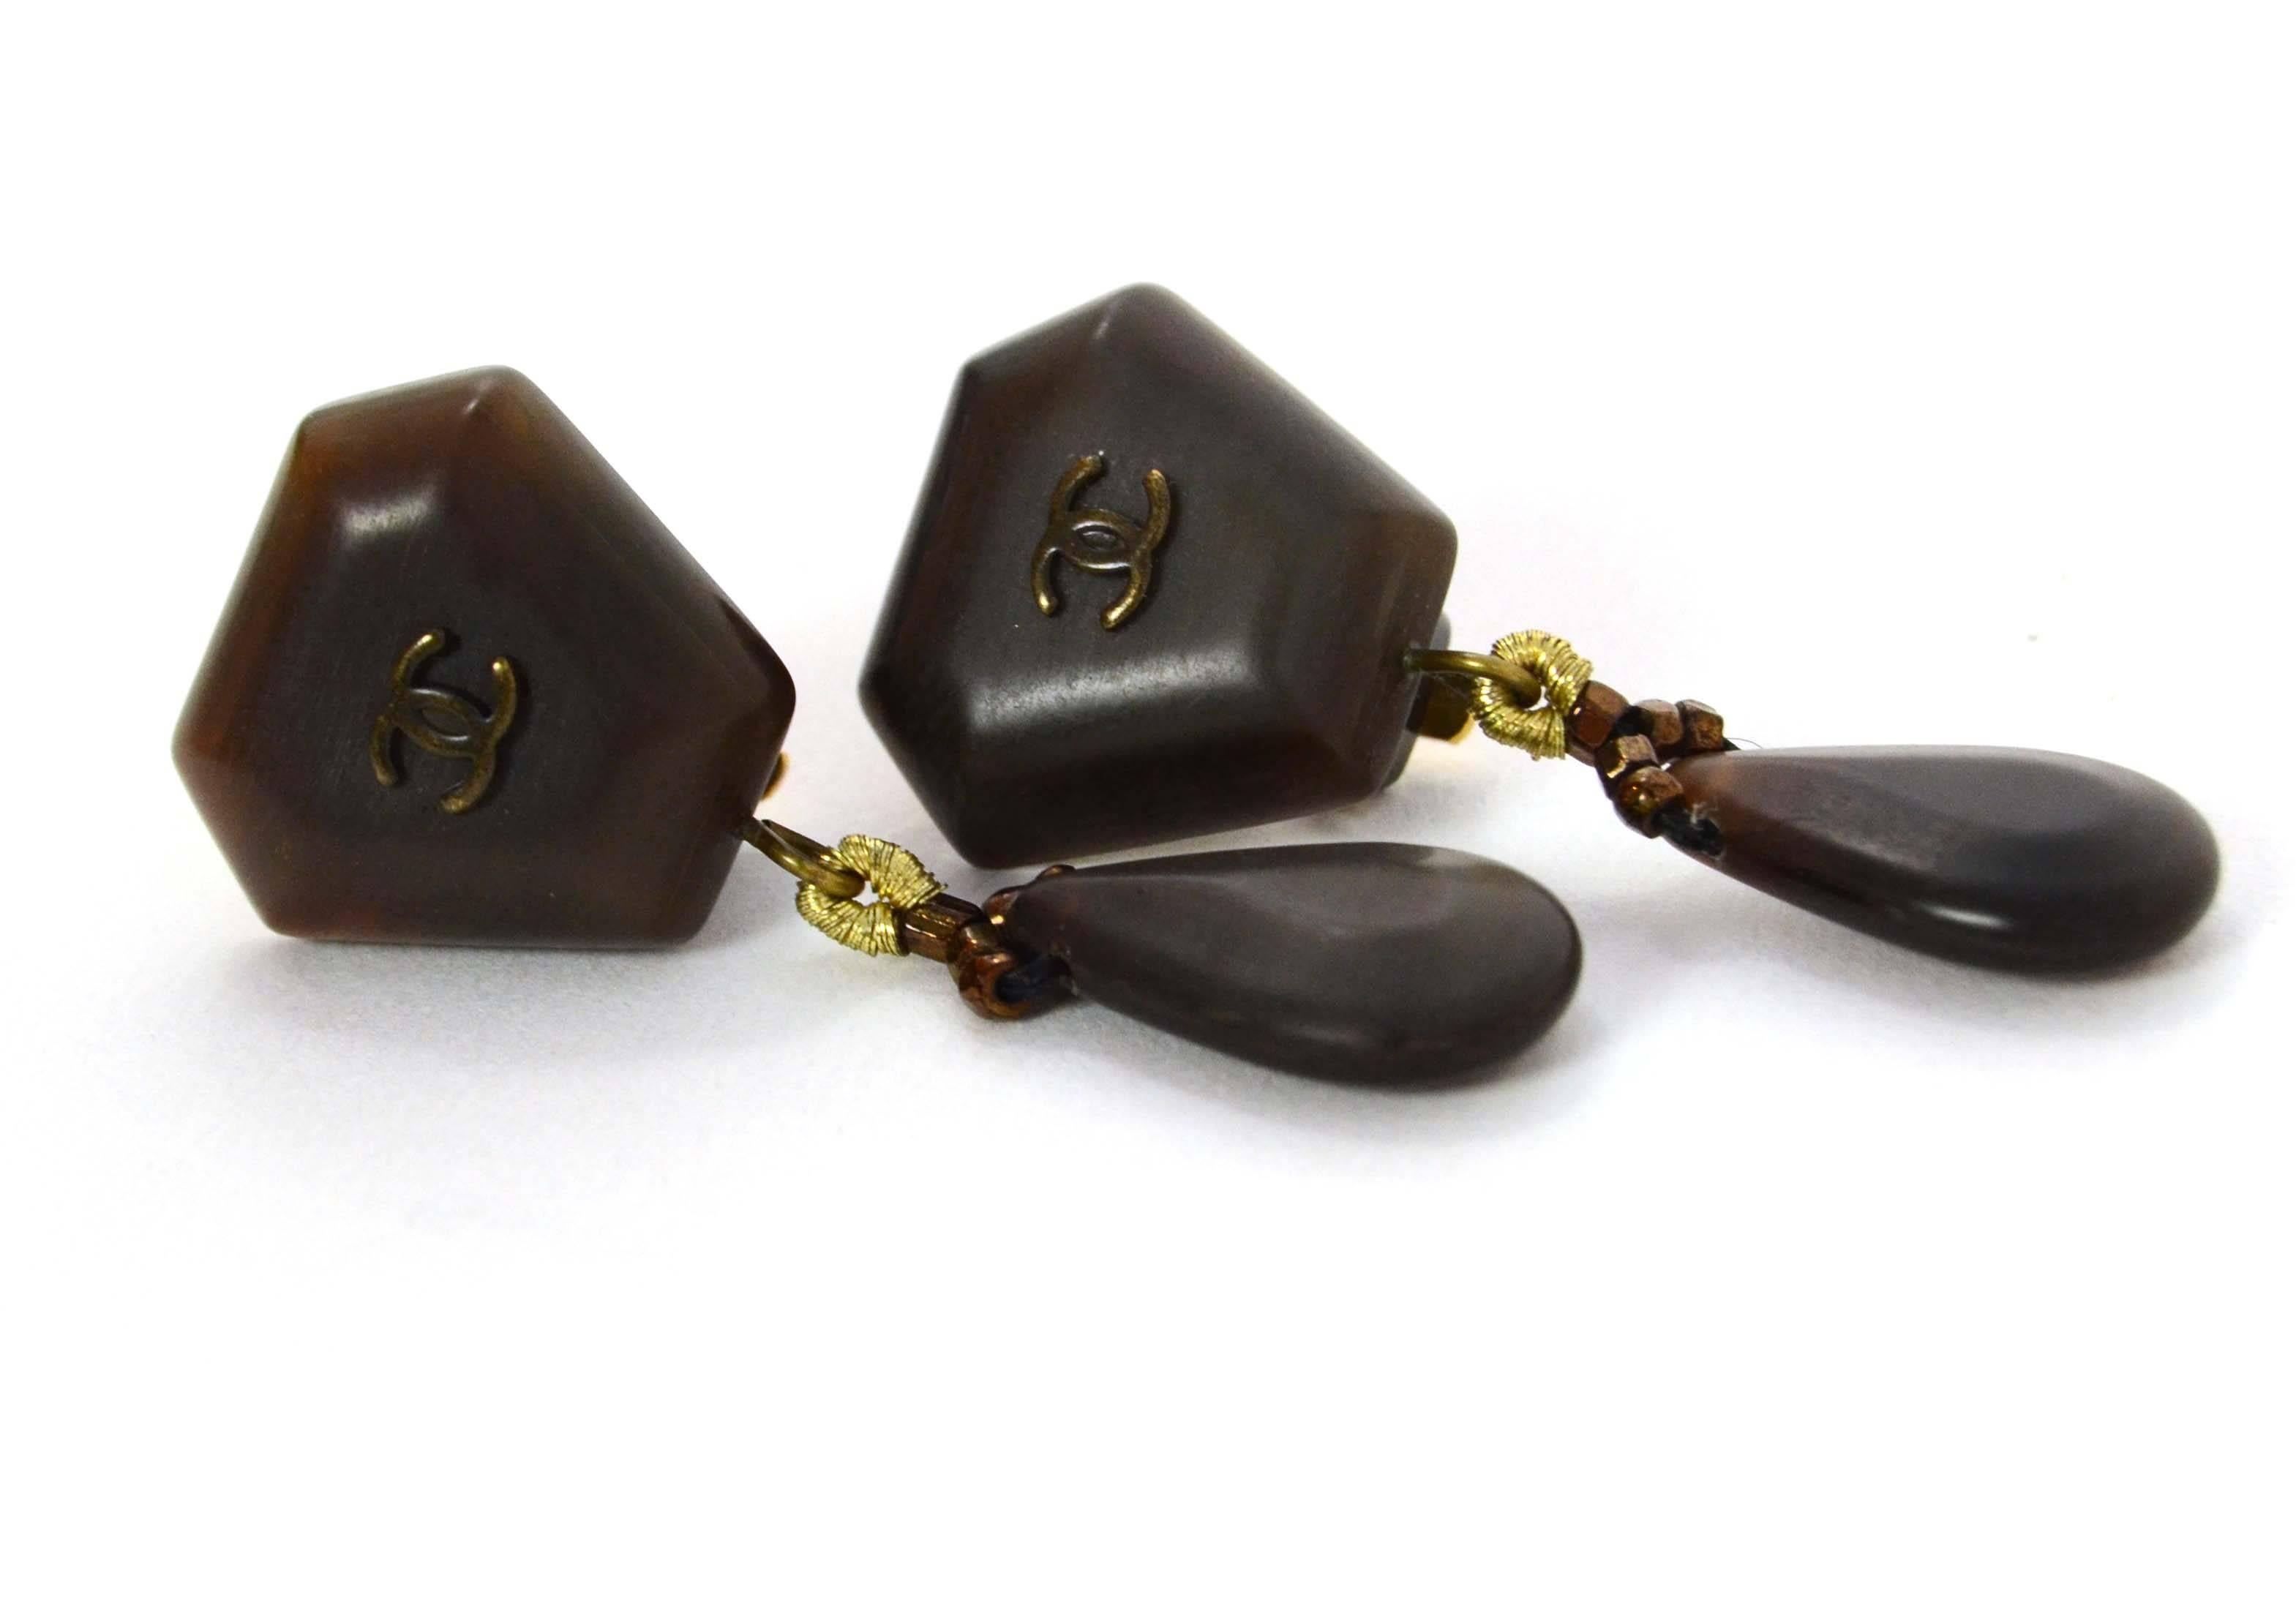 Chanel Vintage '99 Bronze Dangling Clip On Earrings 
Features small CC's at top portion
Made In: France
Year of Production: 1999
Color: Dark brown/bronze
Materials: Metal and stone
Closure: Clip on
Stamp: 99 CC A
Overall Condition: Excellent